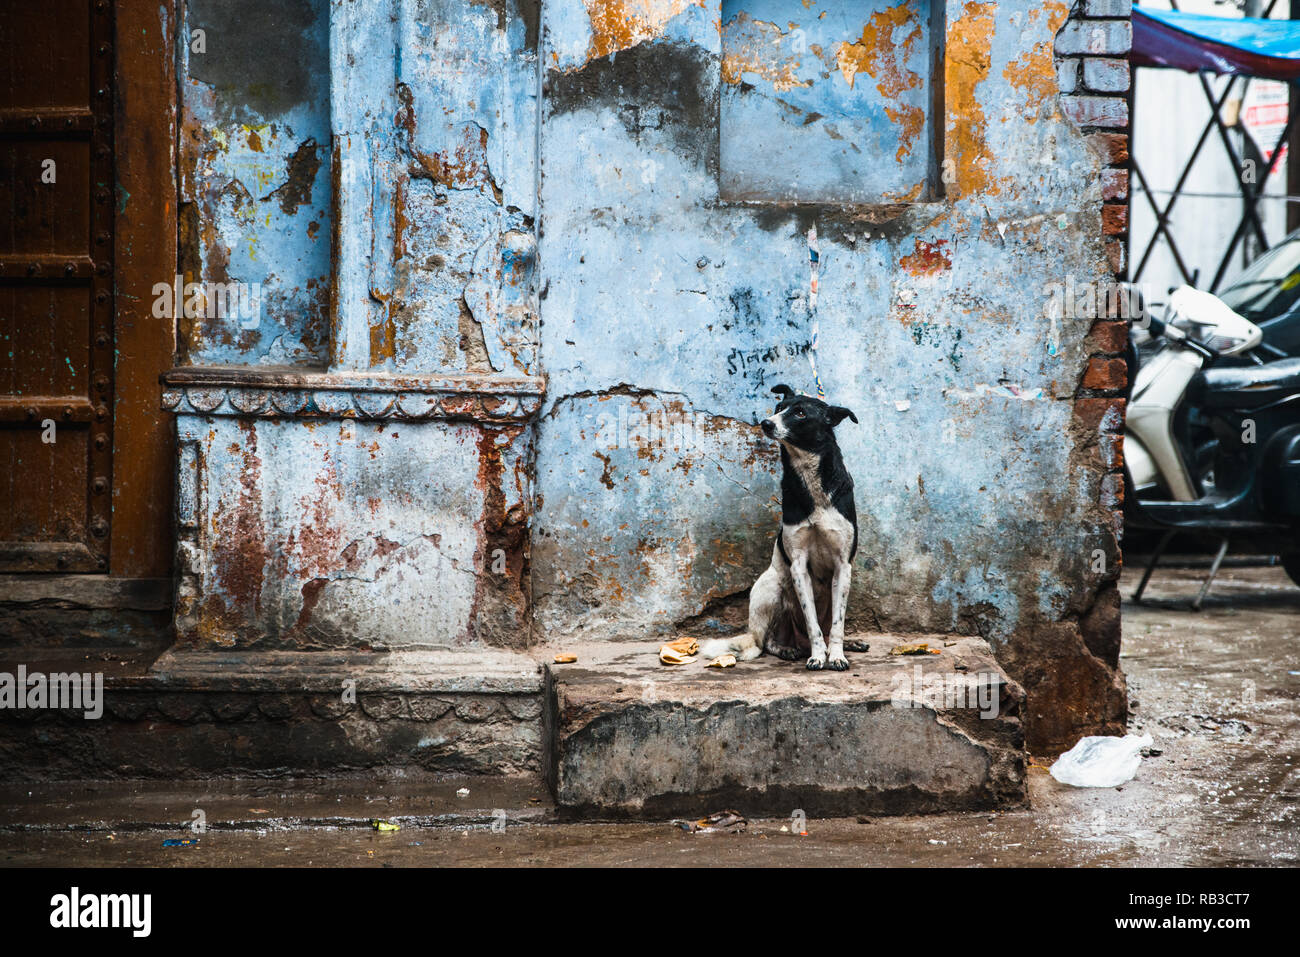 Street dog sitting in the streets of new delhi in india with a blue wall behind as background dog is black and white spotted and is looking sad stock photo